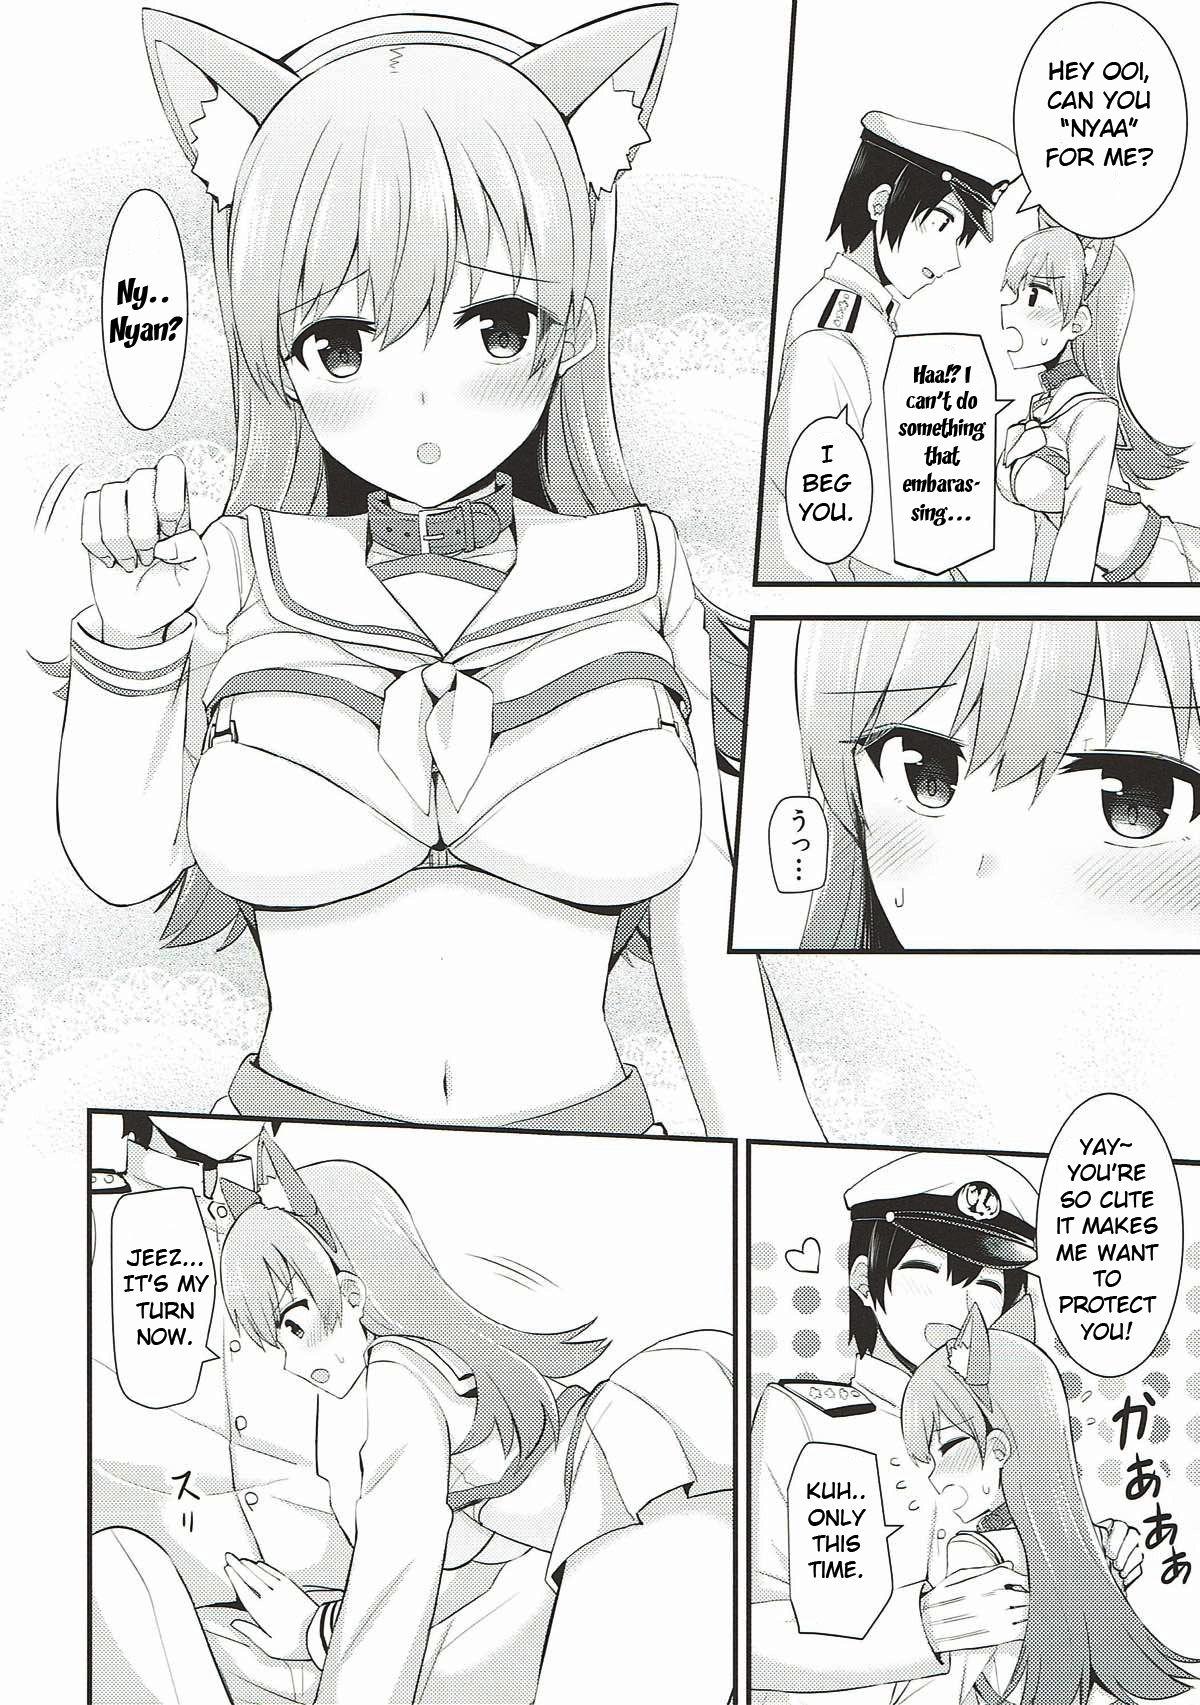 Blowjob Ooi! Nekomimi o Tsukeyou! | Ooi! Put On These Cat Ears! - Kantai collection Hot Girl Porn - Page 13